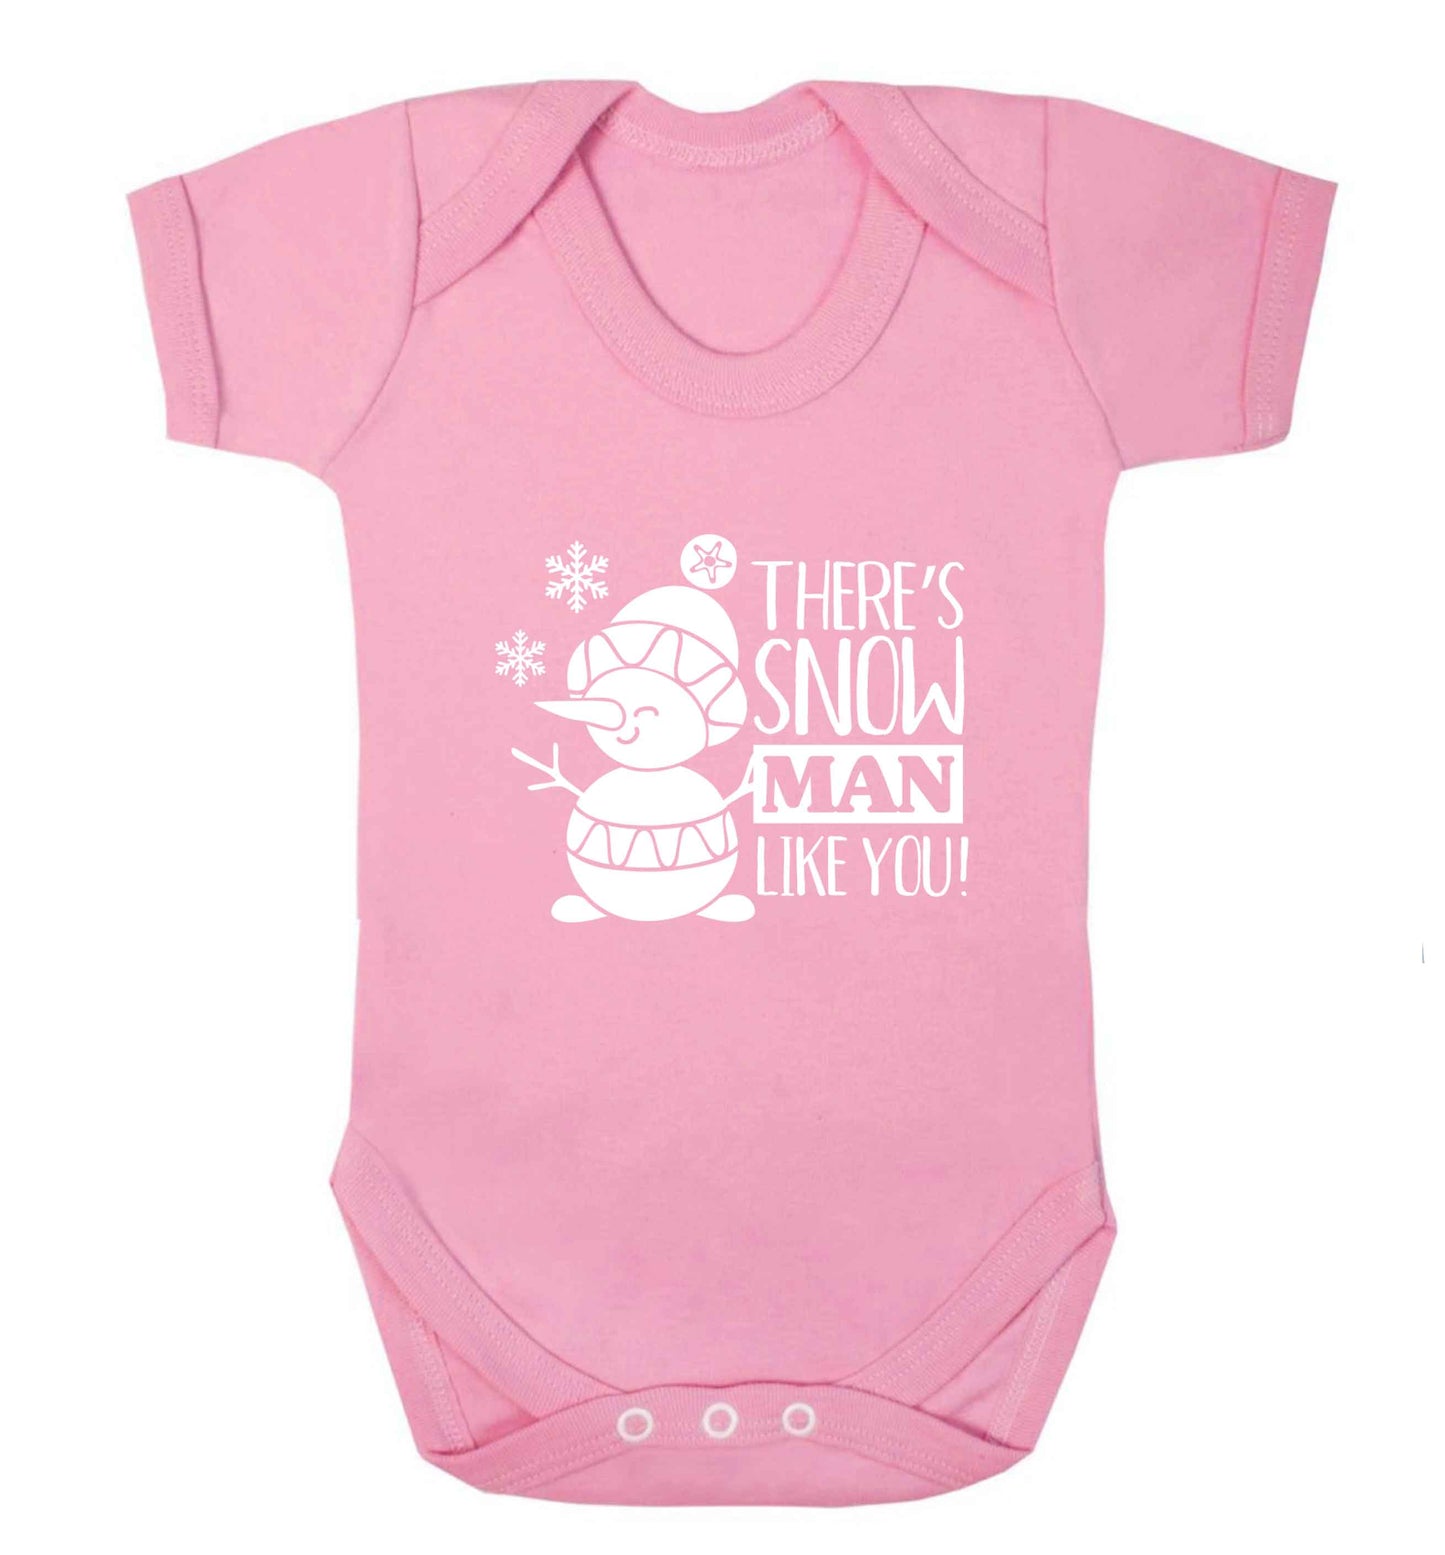 There's snow man like you baby vest pale pink 18-24 months